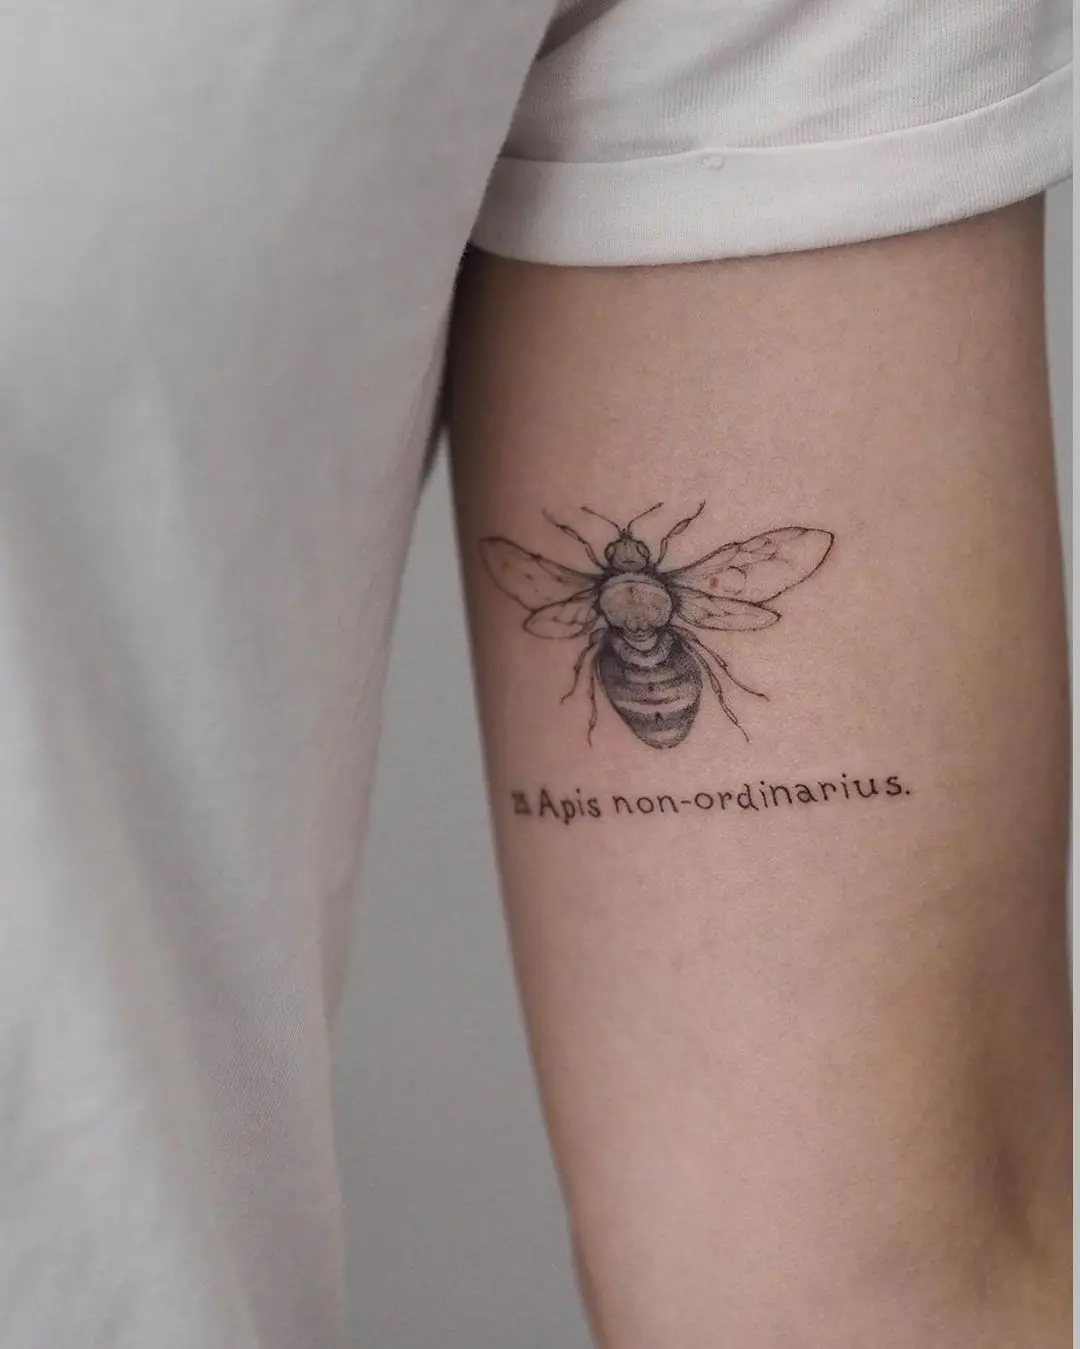 Here Are the Poetry Tattoos Lovely Enough to Compare to a Summers Day ...